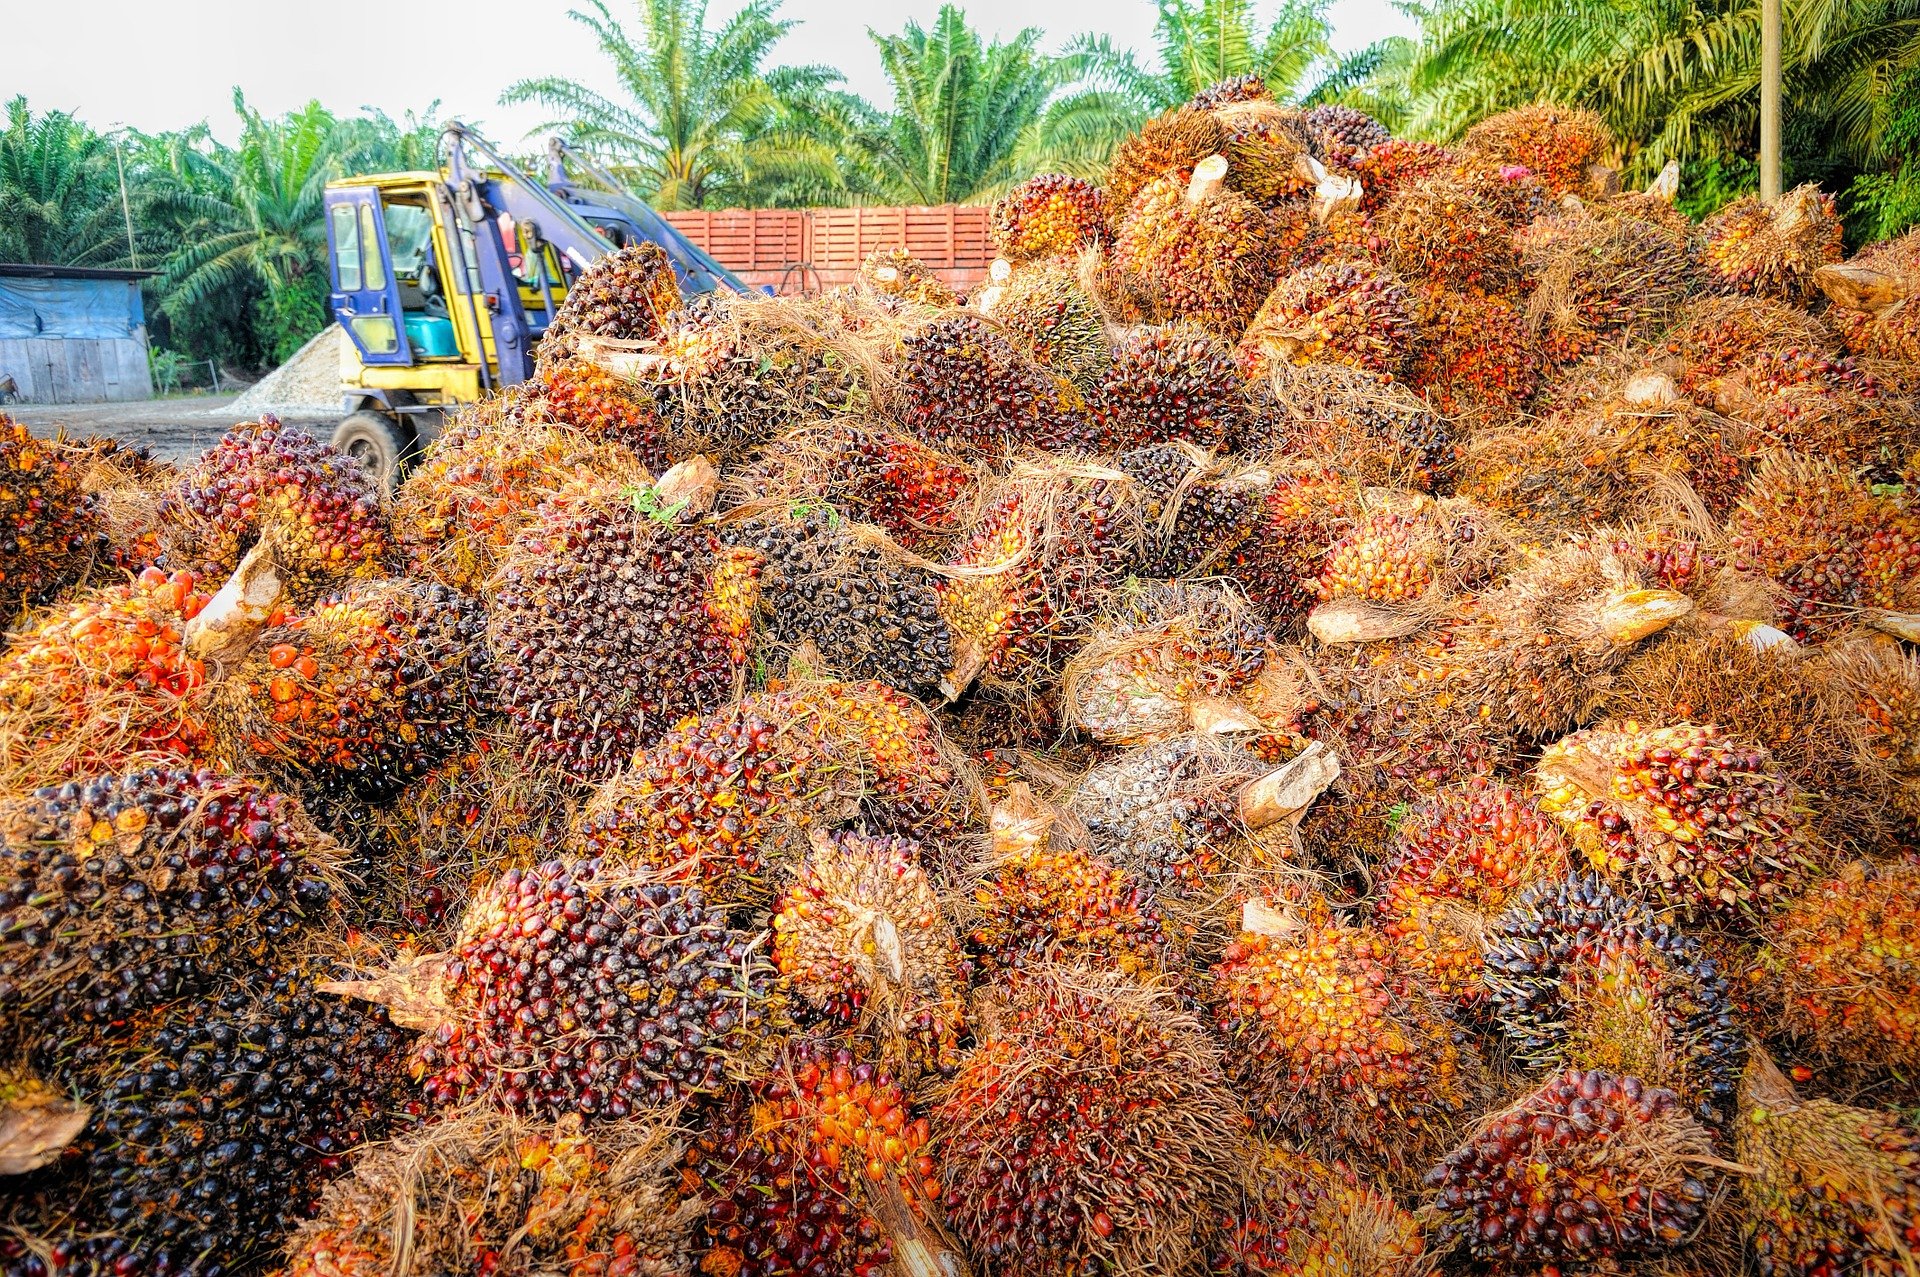 Indonesia-Netherlands expand cooperation on sustainable palm oil for SDGs